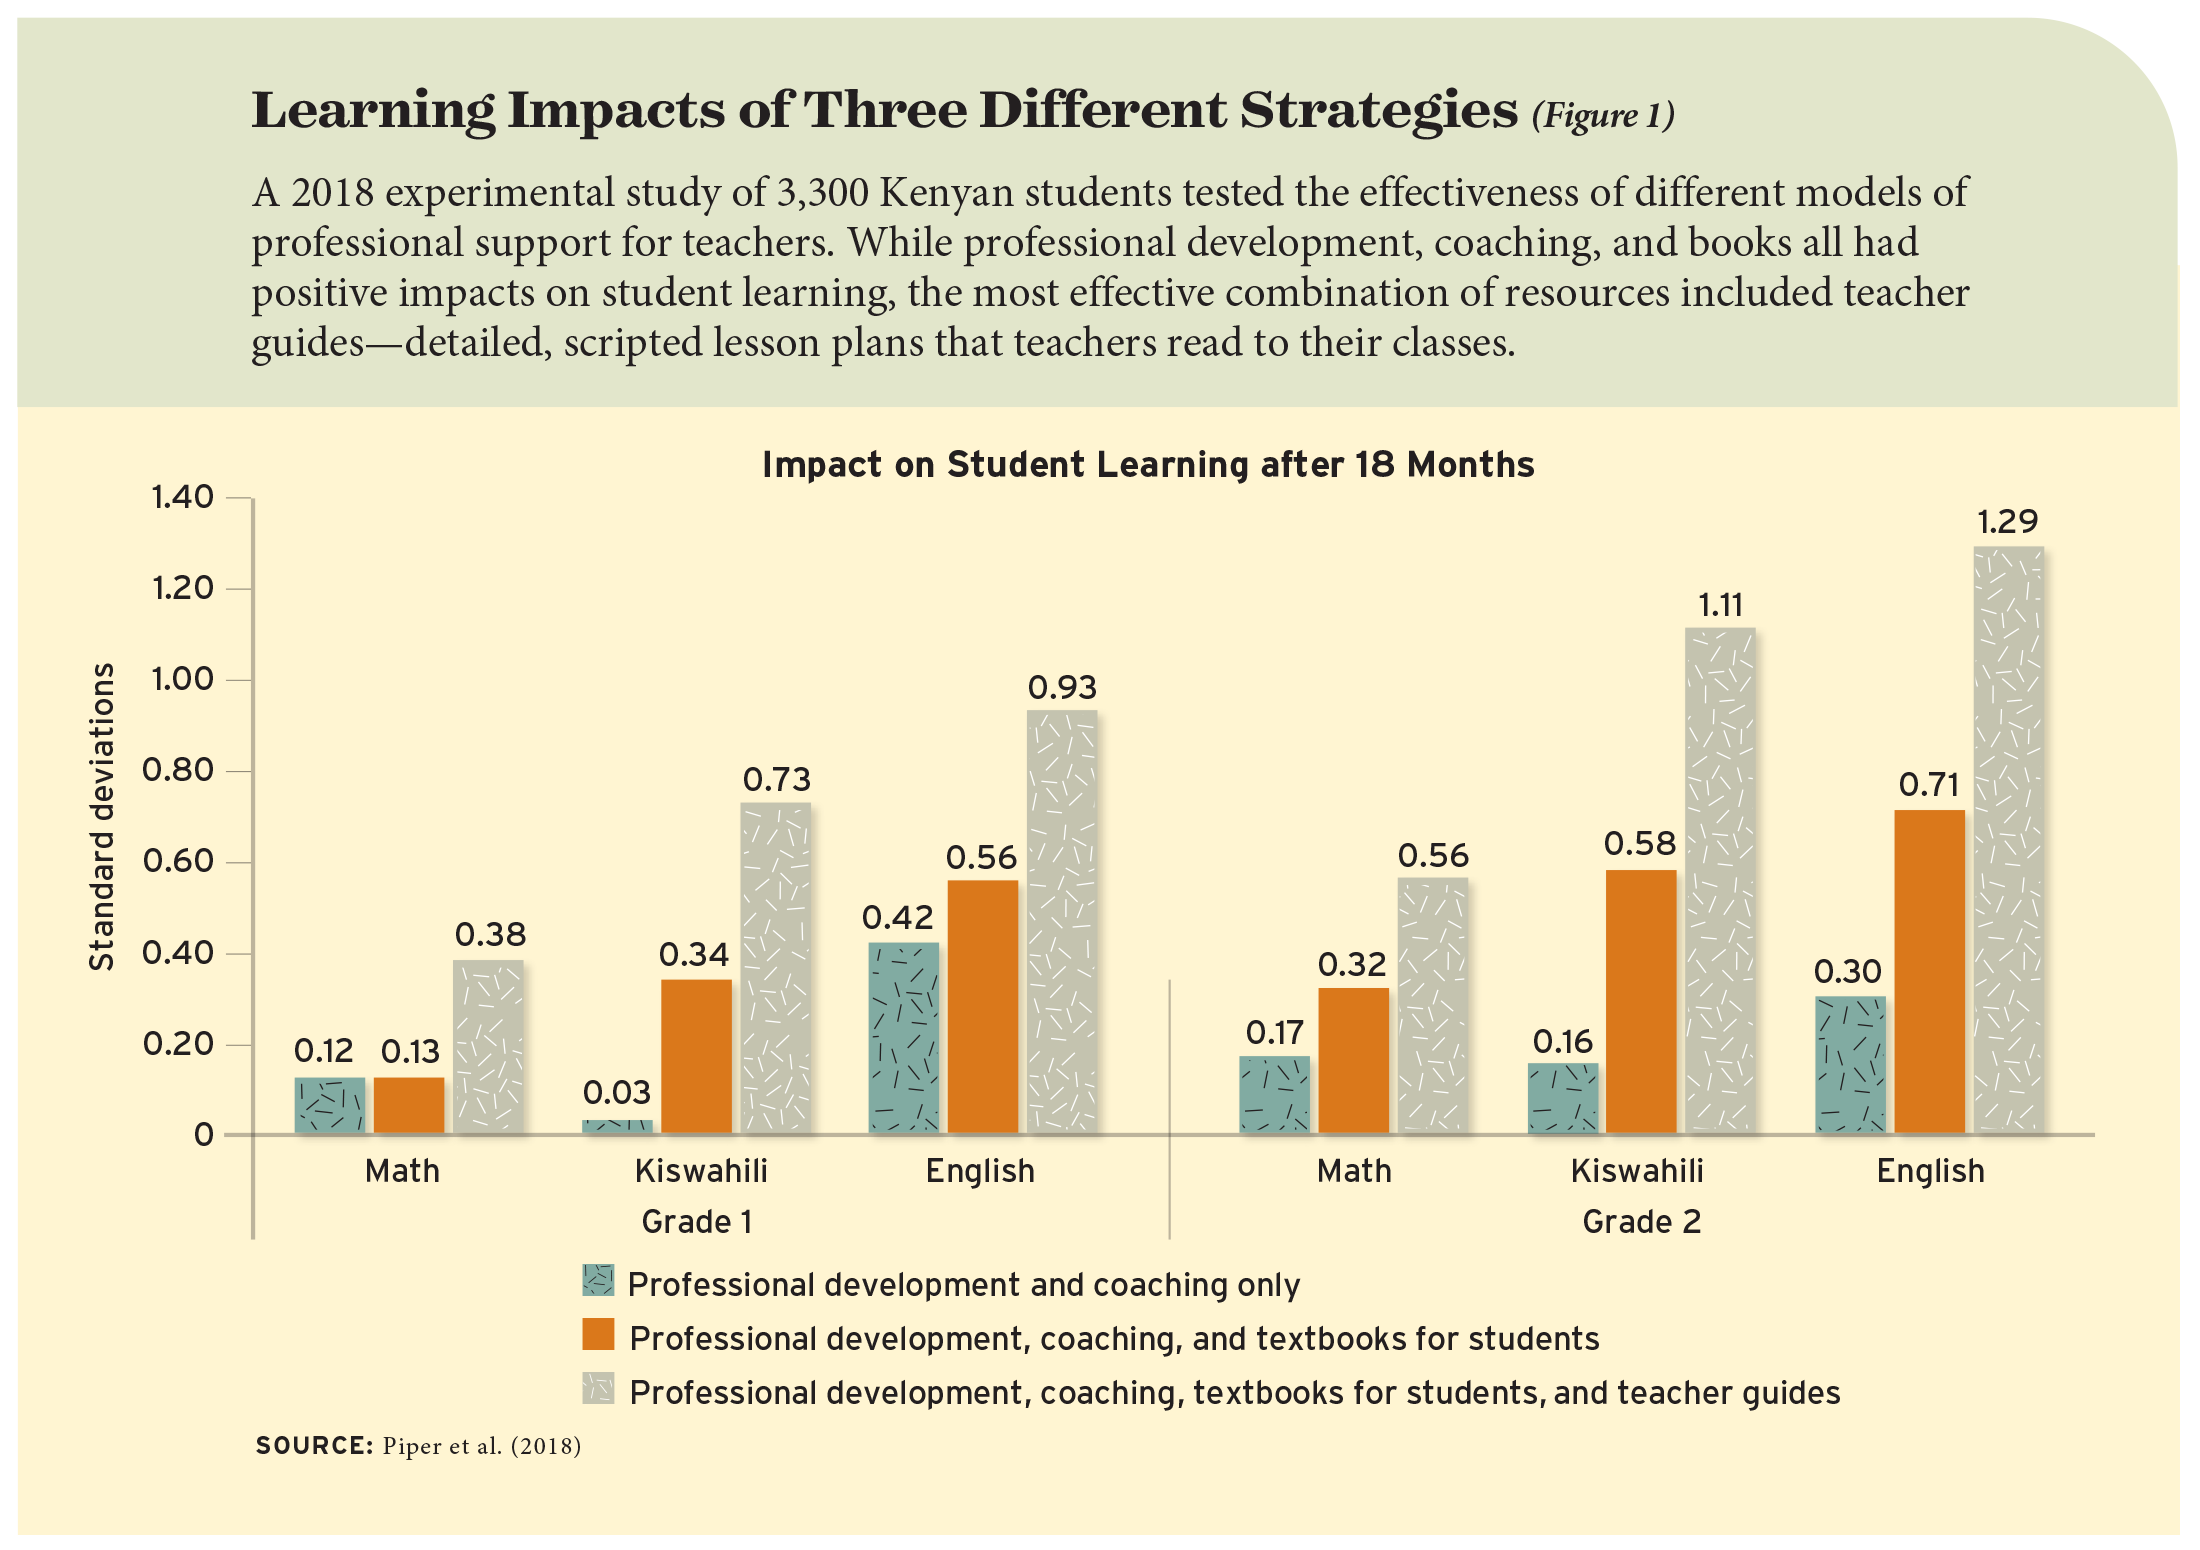 Figure 1: Learning Impacts of Three Different Strategies